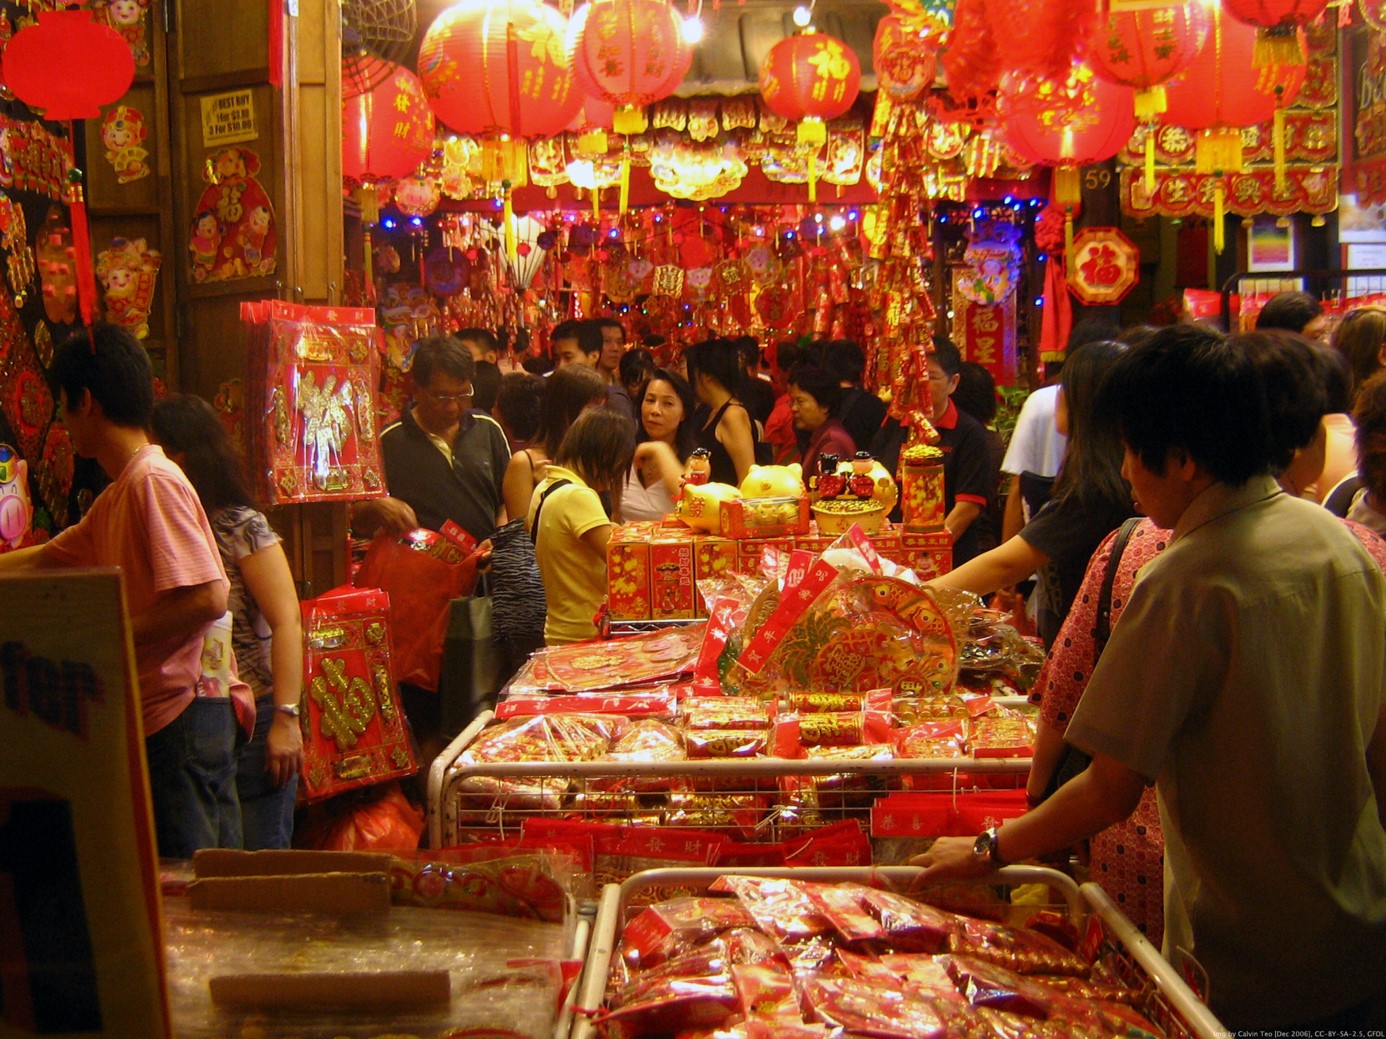 People looking at a market stall in China